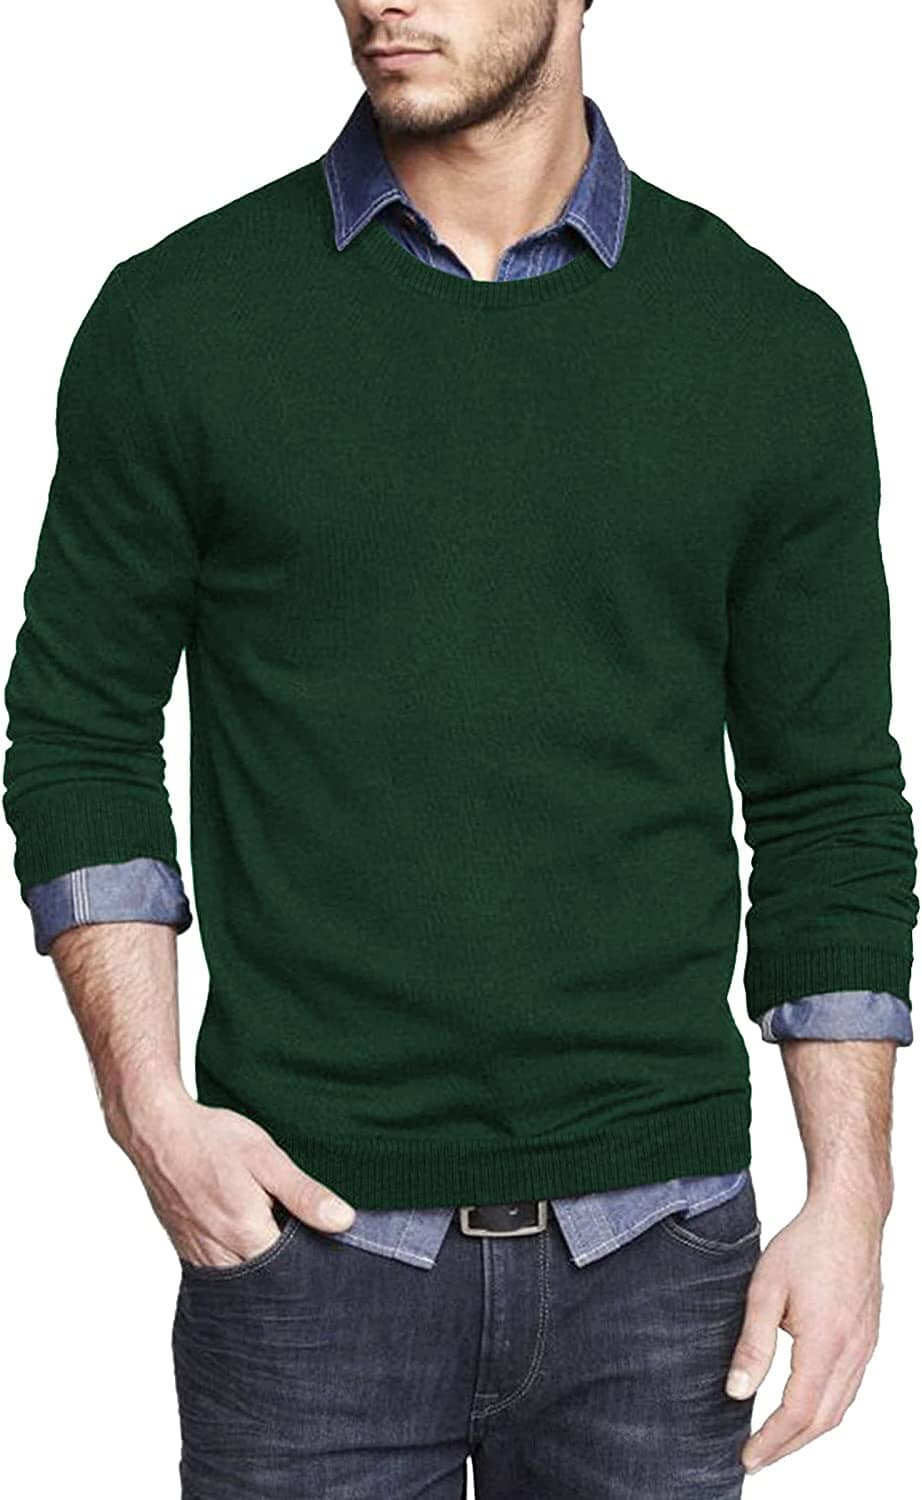 Solid Classic Crew Neck Sweater (US Only) Sweaters COOFANDY Store Dark Green S 